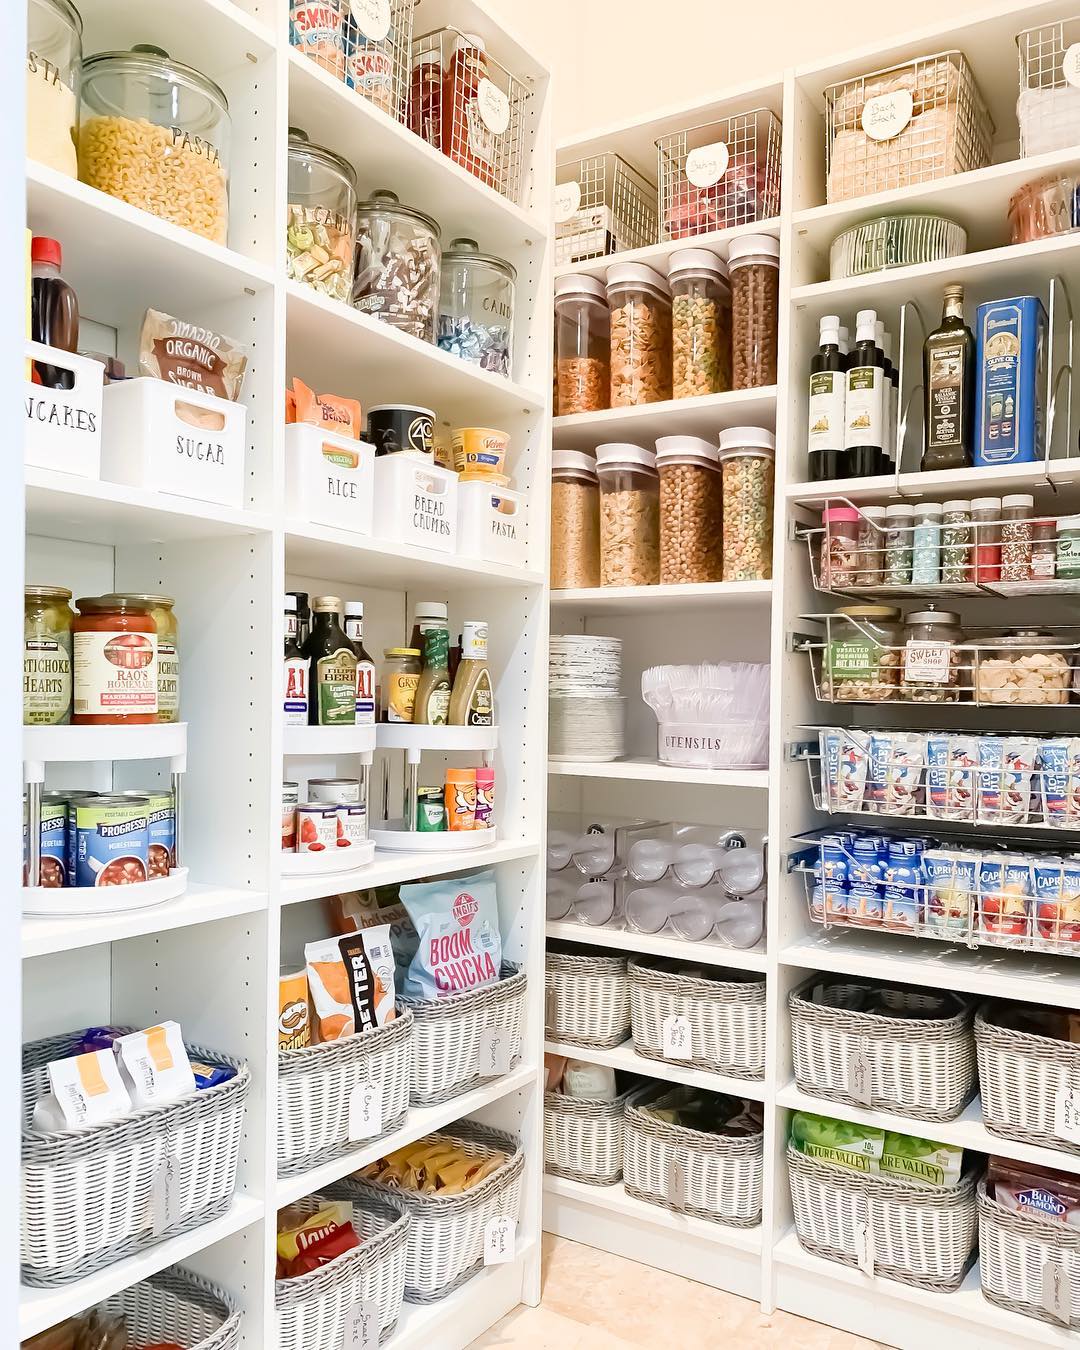 Organized pantry with bins and baskets. Photo by Instagram user @theprojectneat